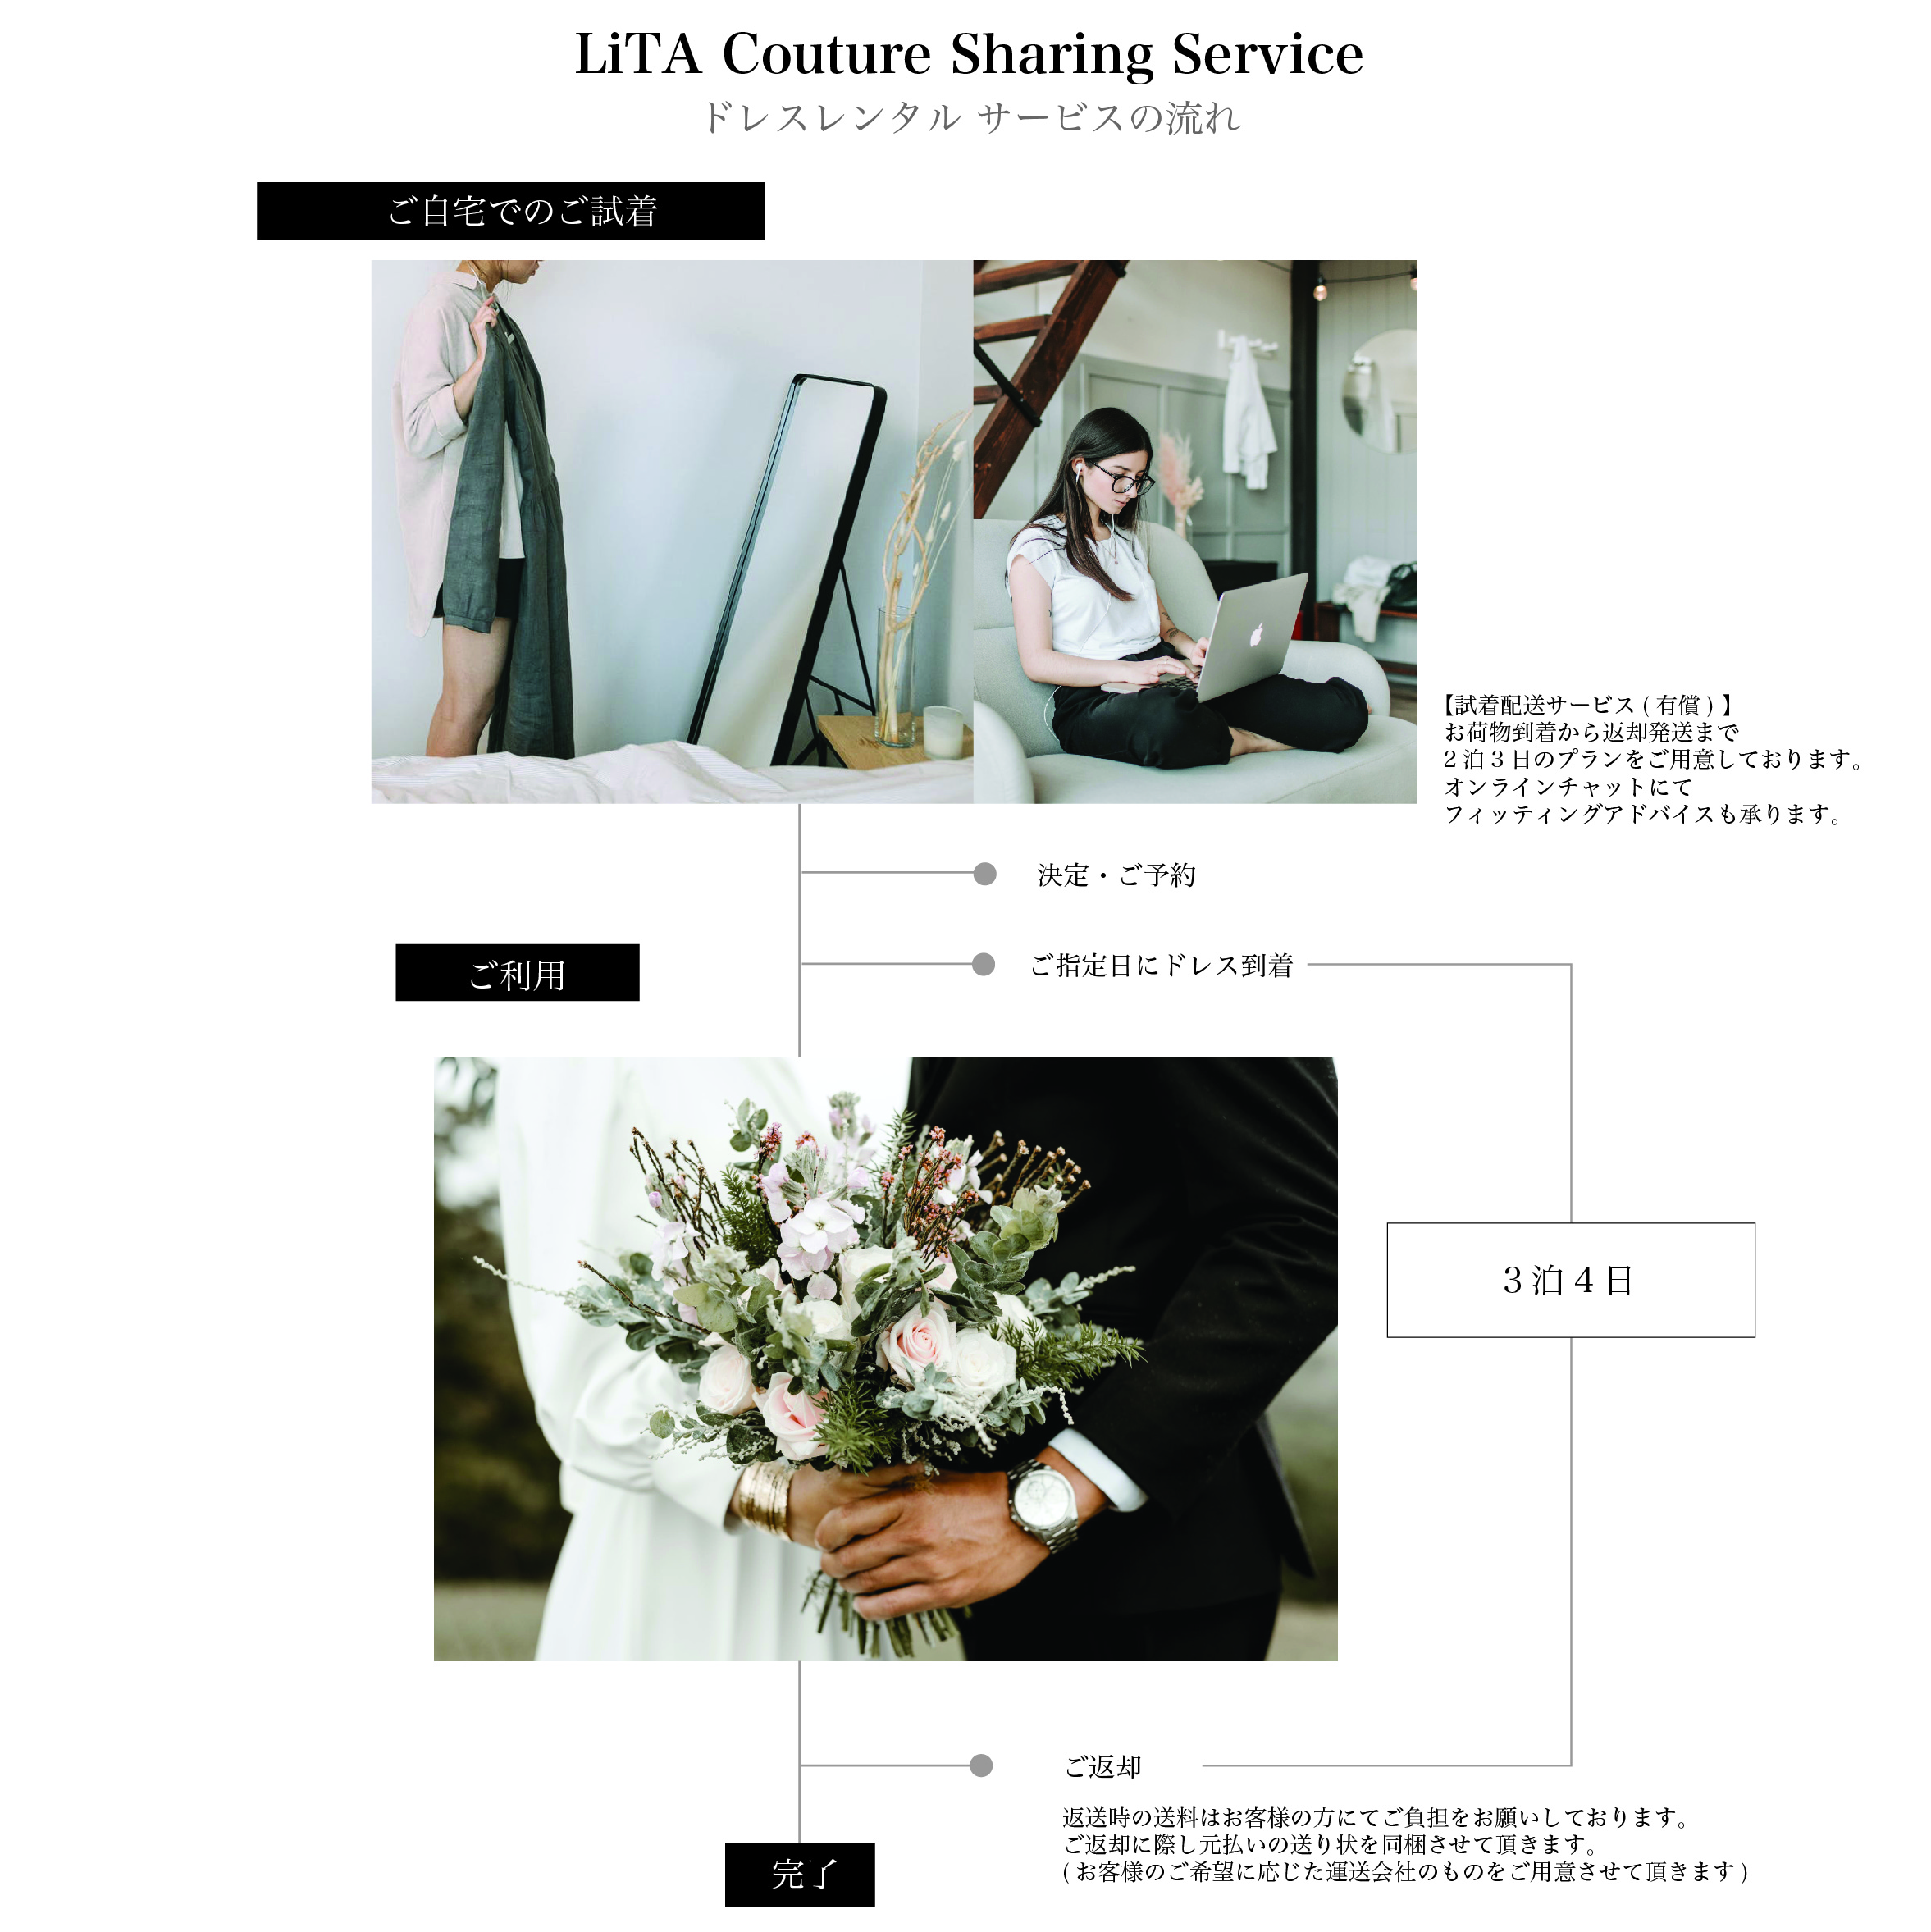 LiTA Couture Sharing Service